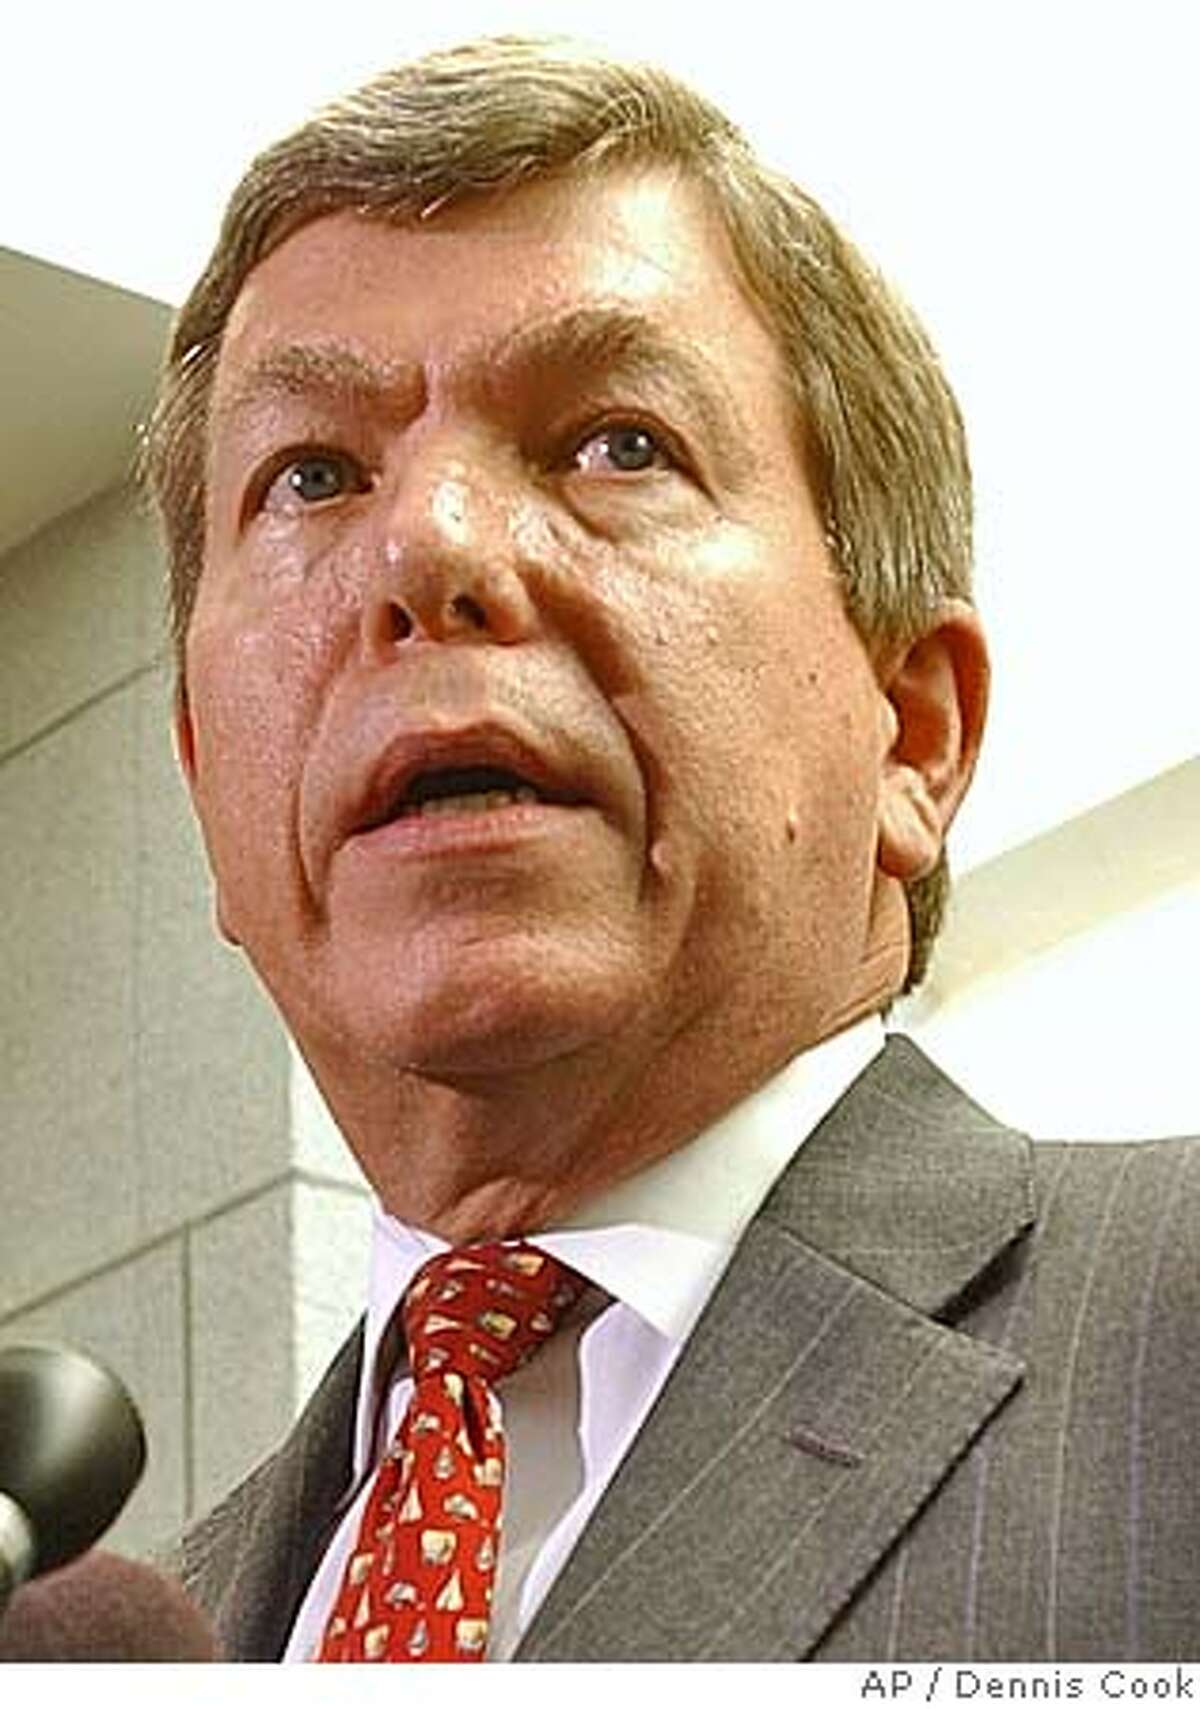 Representative Roy Blunt, R-Mo., left, talks to reporters on Capitol Hill Wednesday, Sept. 28, 2005, after being named to succeed Rep. Tom Delay, R-Tex., as House Majority Leader. DeLay has been indicted by a Texas grand jury on conspiracy charges. (AP Photo/Dennis Cook)